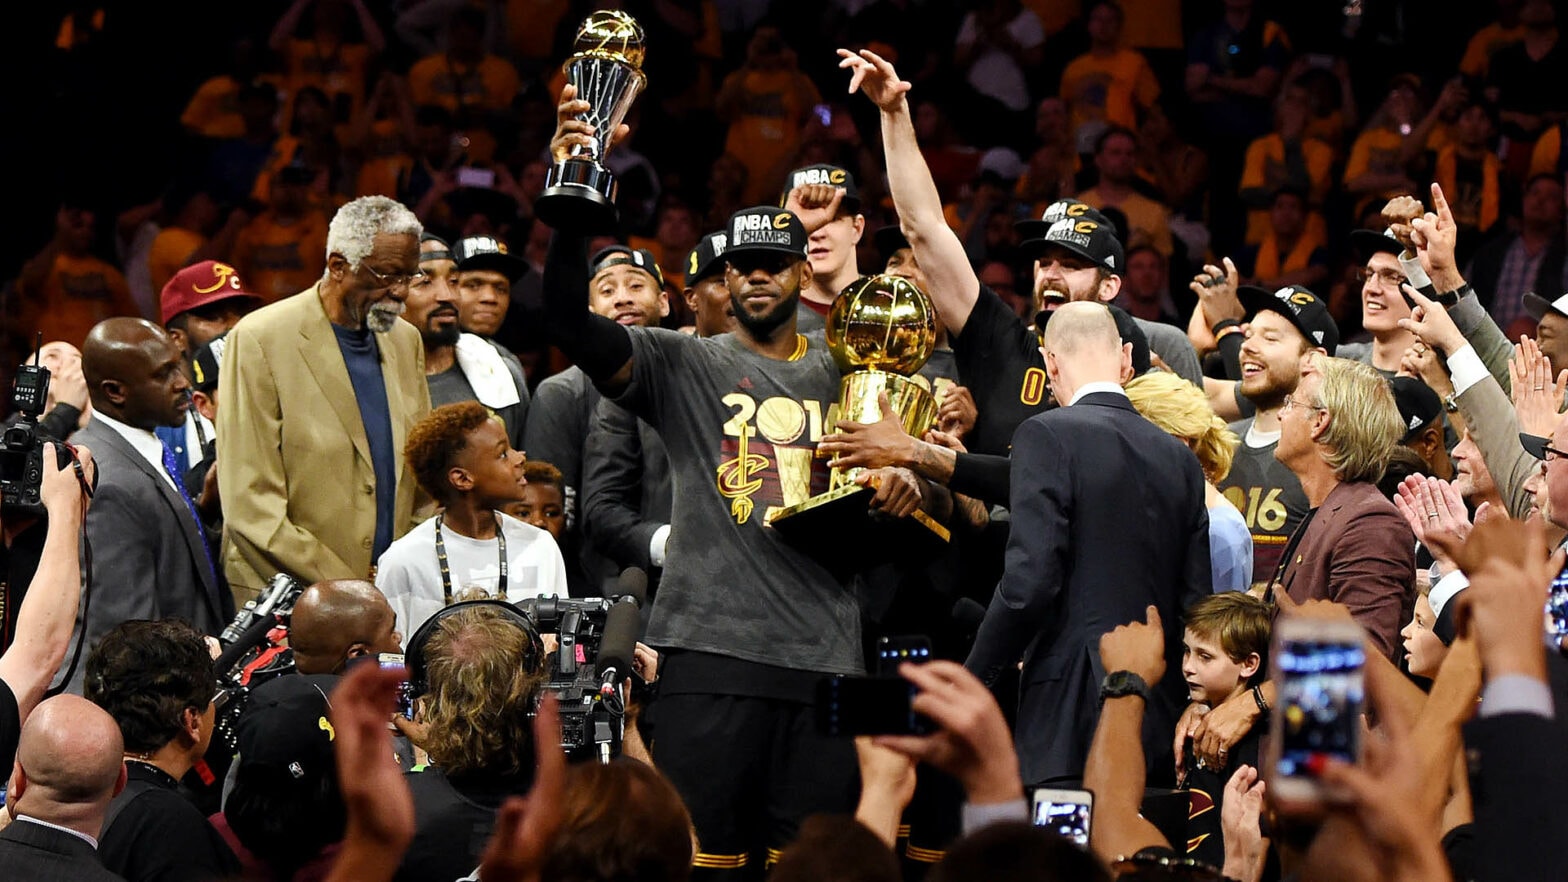 LeBron James winning the 2016 NBA Championship with the Cleveland Cavaliers